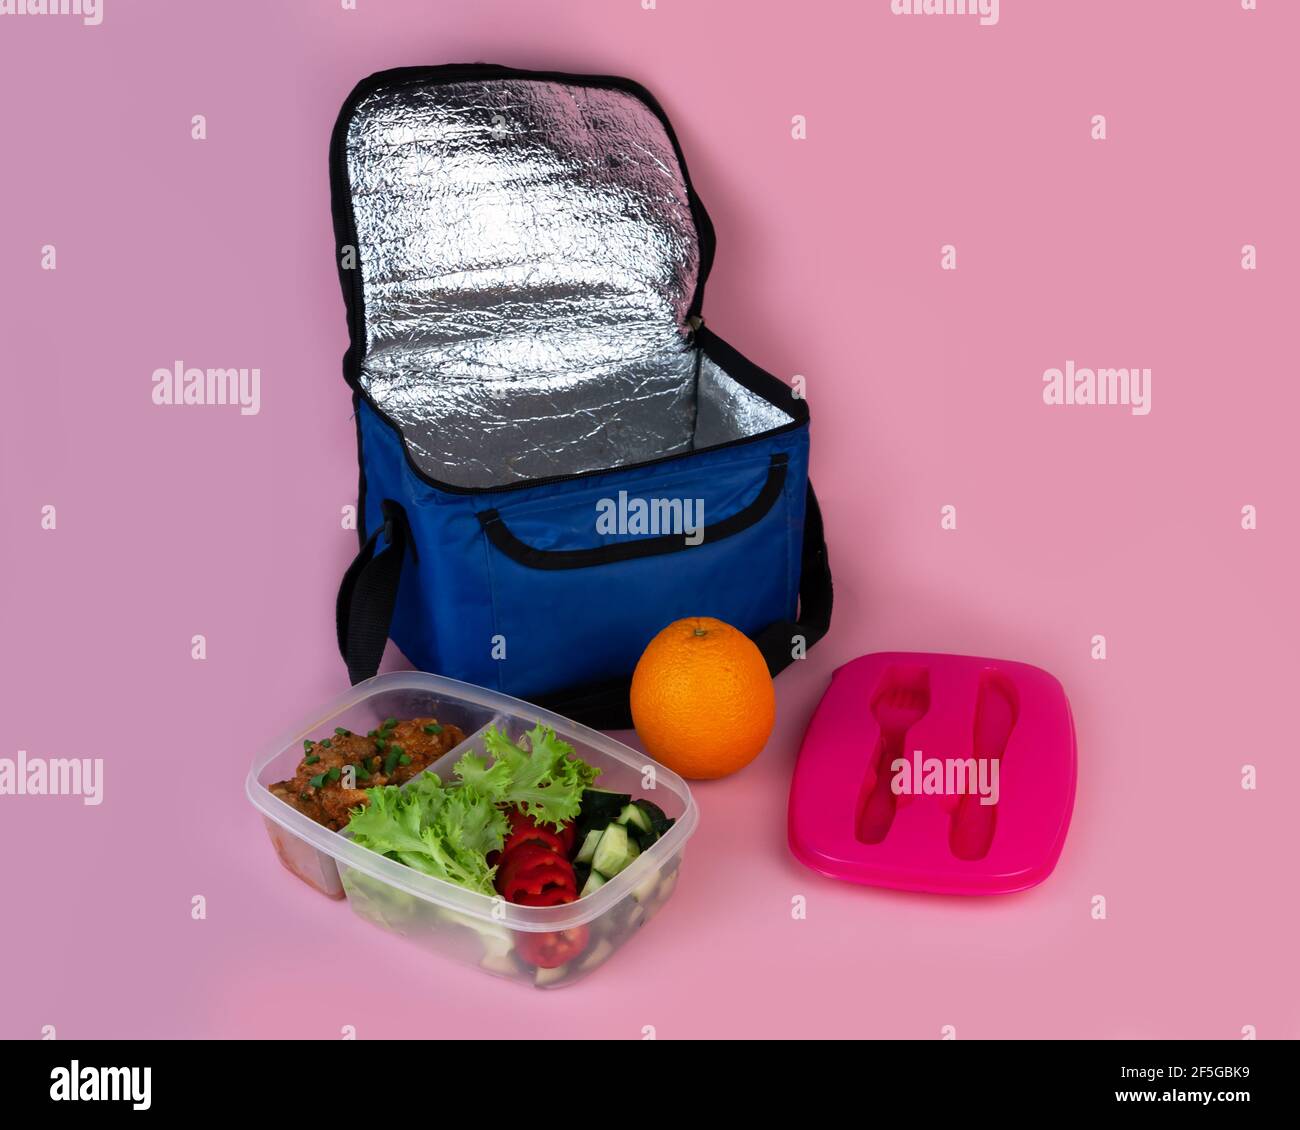 https://c8.alamy.com/comp/2F5GBK9/thermal-bag-and-container-with-salad-meat-and-orange-homemade-takeaway-lunch-2F5GBK9.jpg